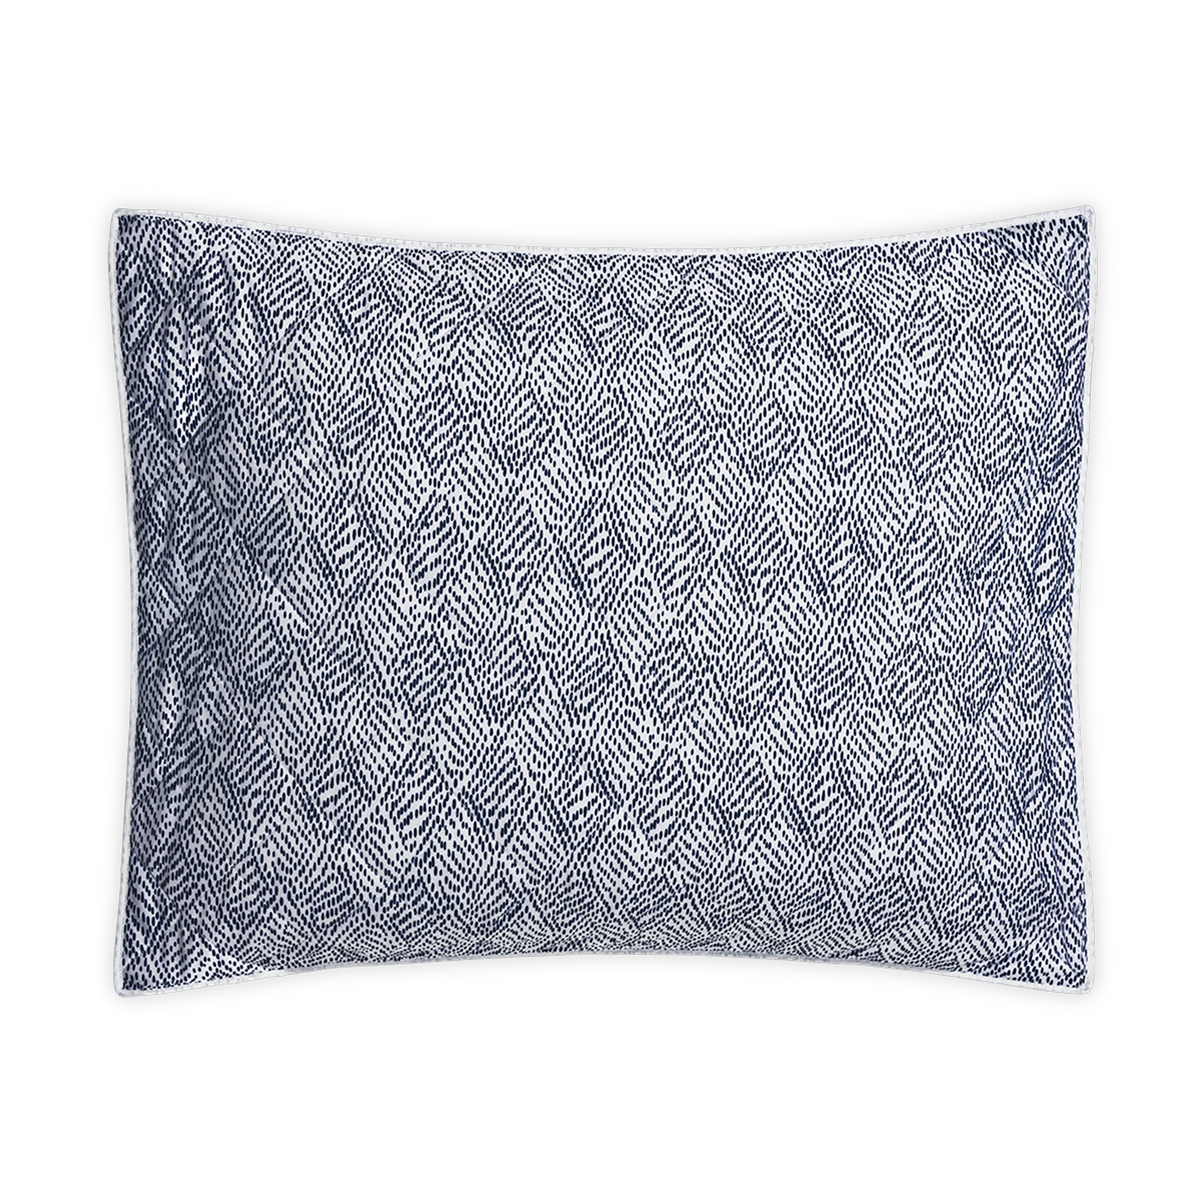 Quilted Standard Sham of Matouk Duma Diamond Bedding in Navy Color